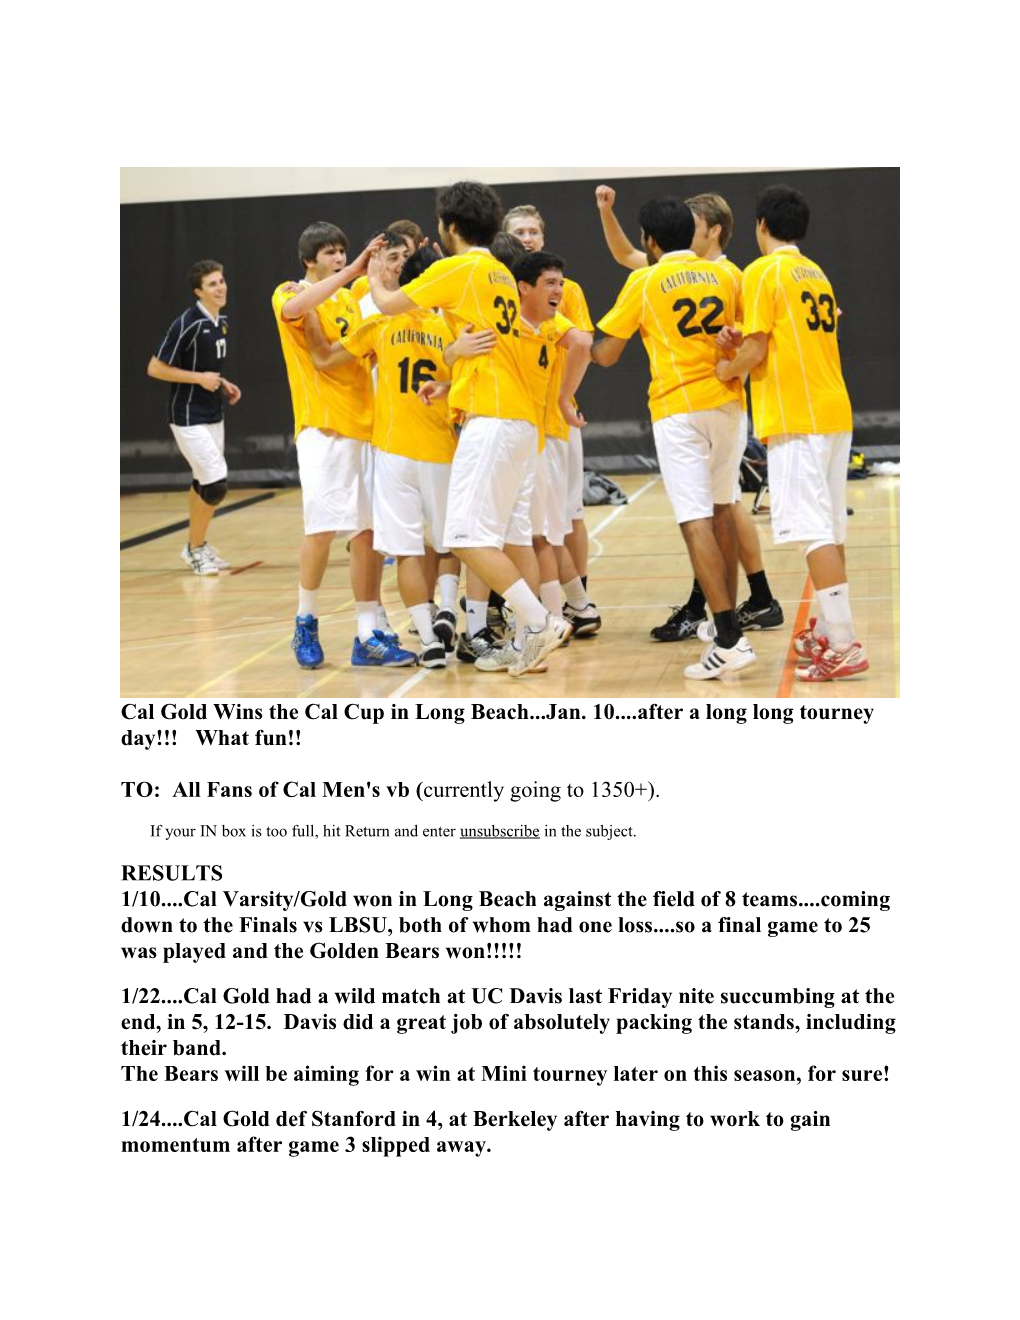 TO: All Fans of Cal Men's Vb ( Currently Going to 1350+)